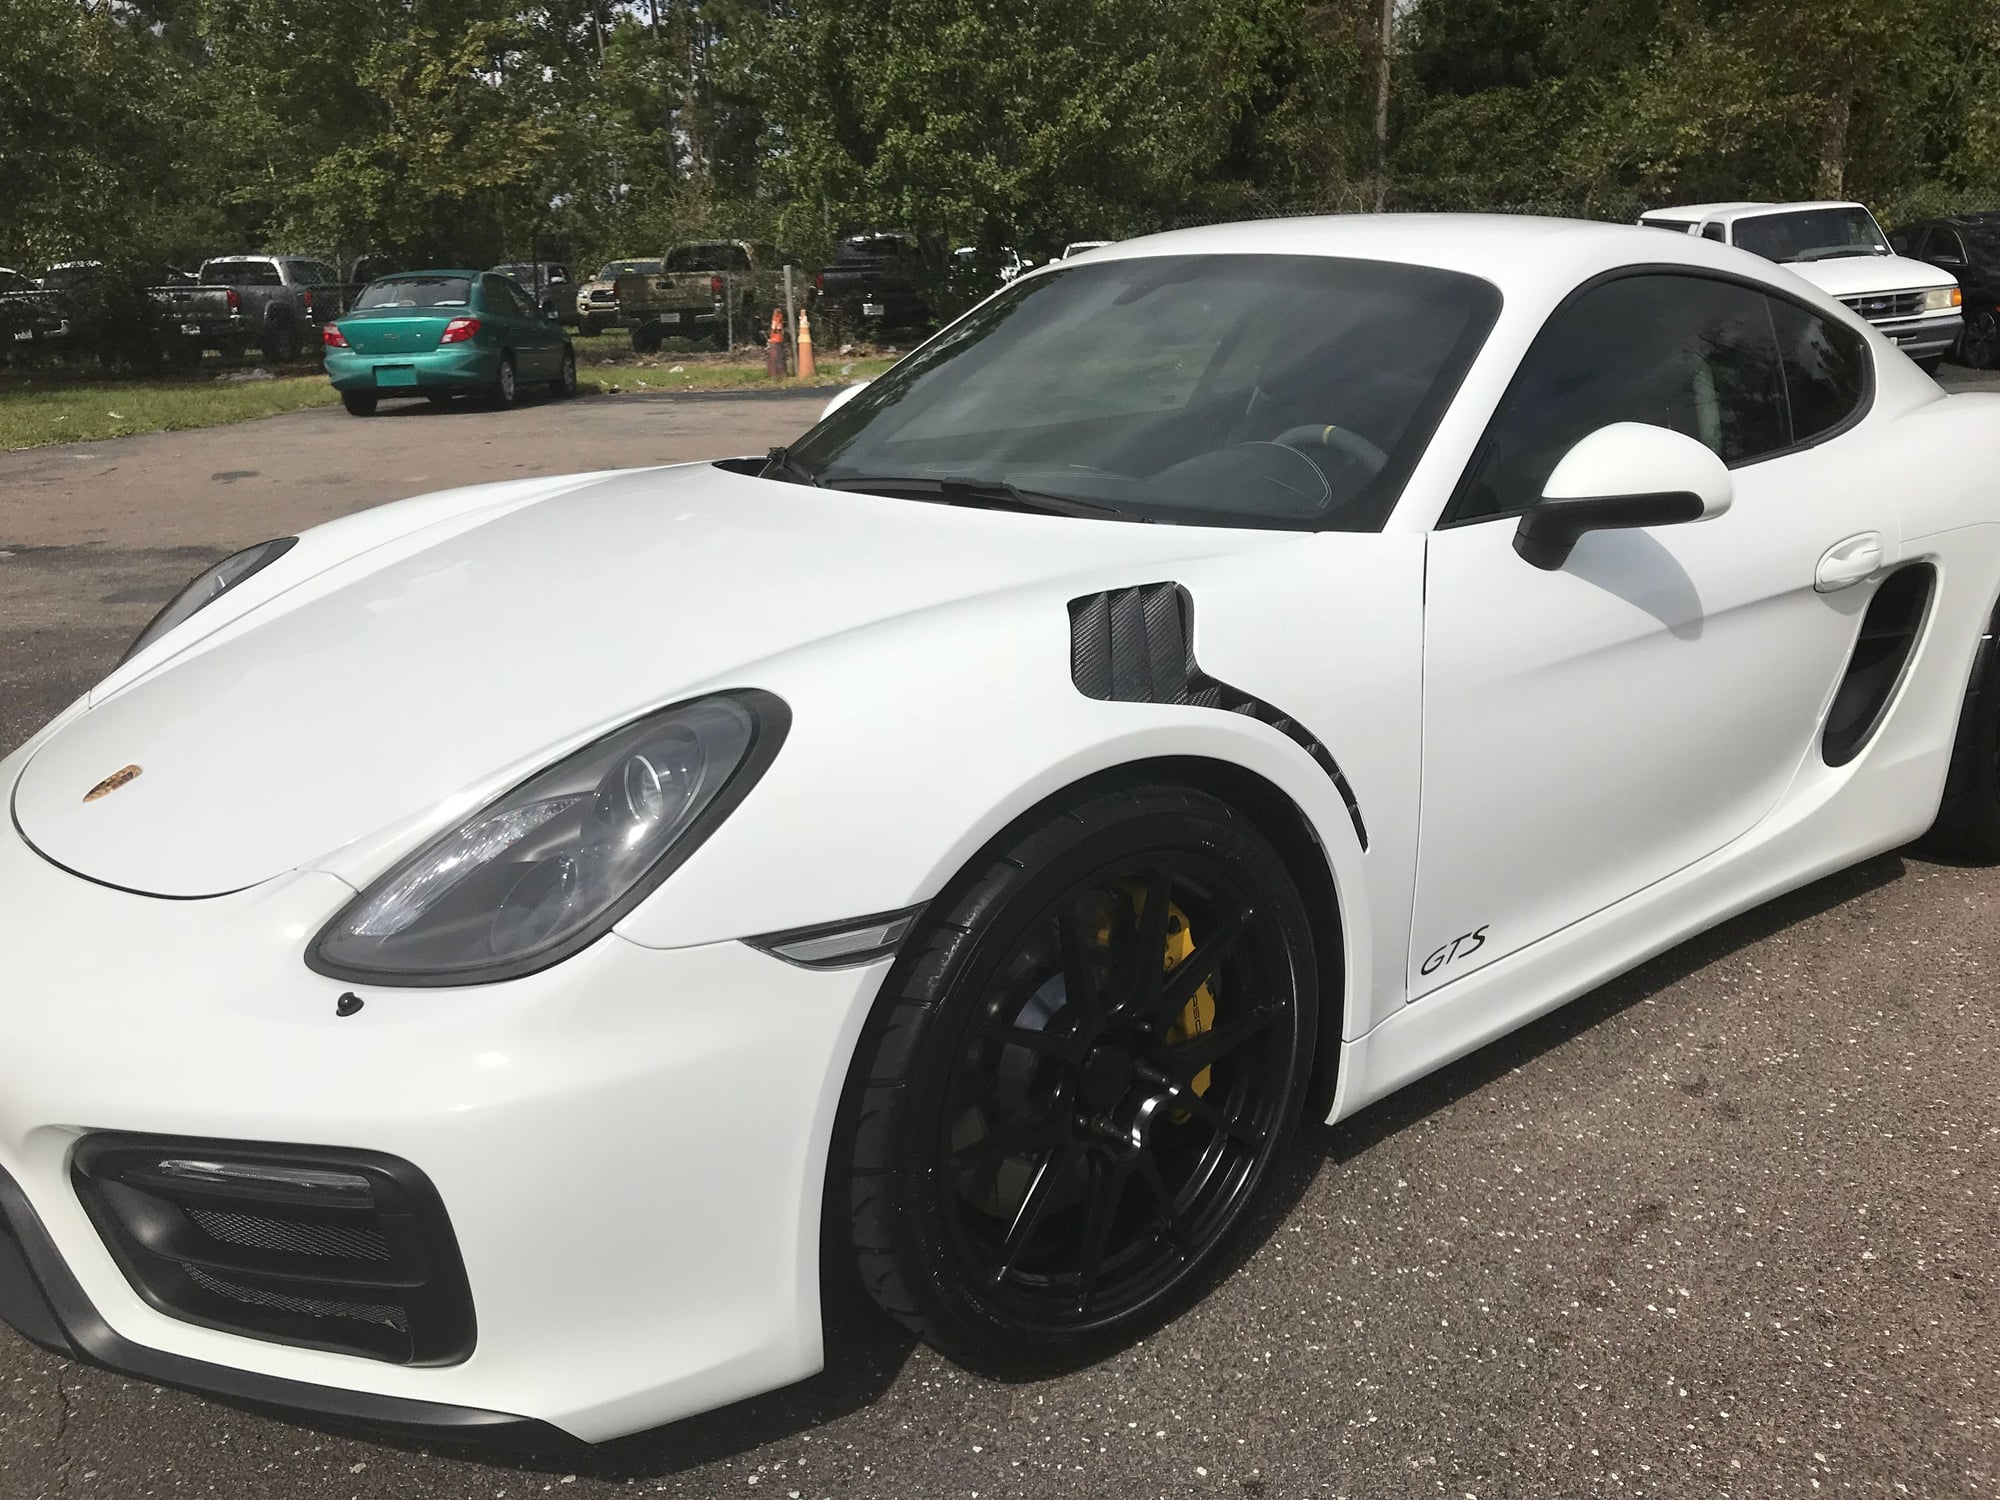 2016 Porsche Cayman - For sale:2016 Cayman GTS with 4.0l X51 swap and tons of goodies. Incredible build - Used - VIN WP0AB2A87GK186343 - 12,500 Miles - 6 cyl - 2WD - Automatic - Coupe - White - Jacksonville, FL 32223, United States